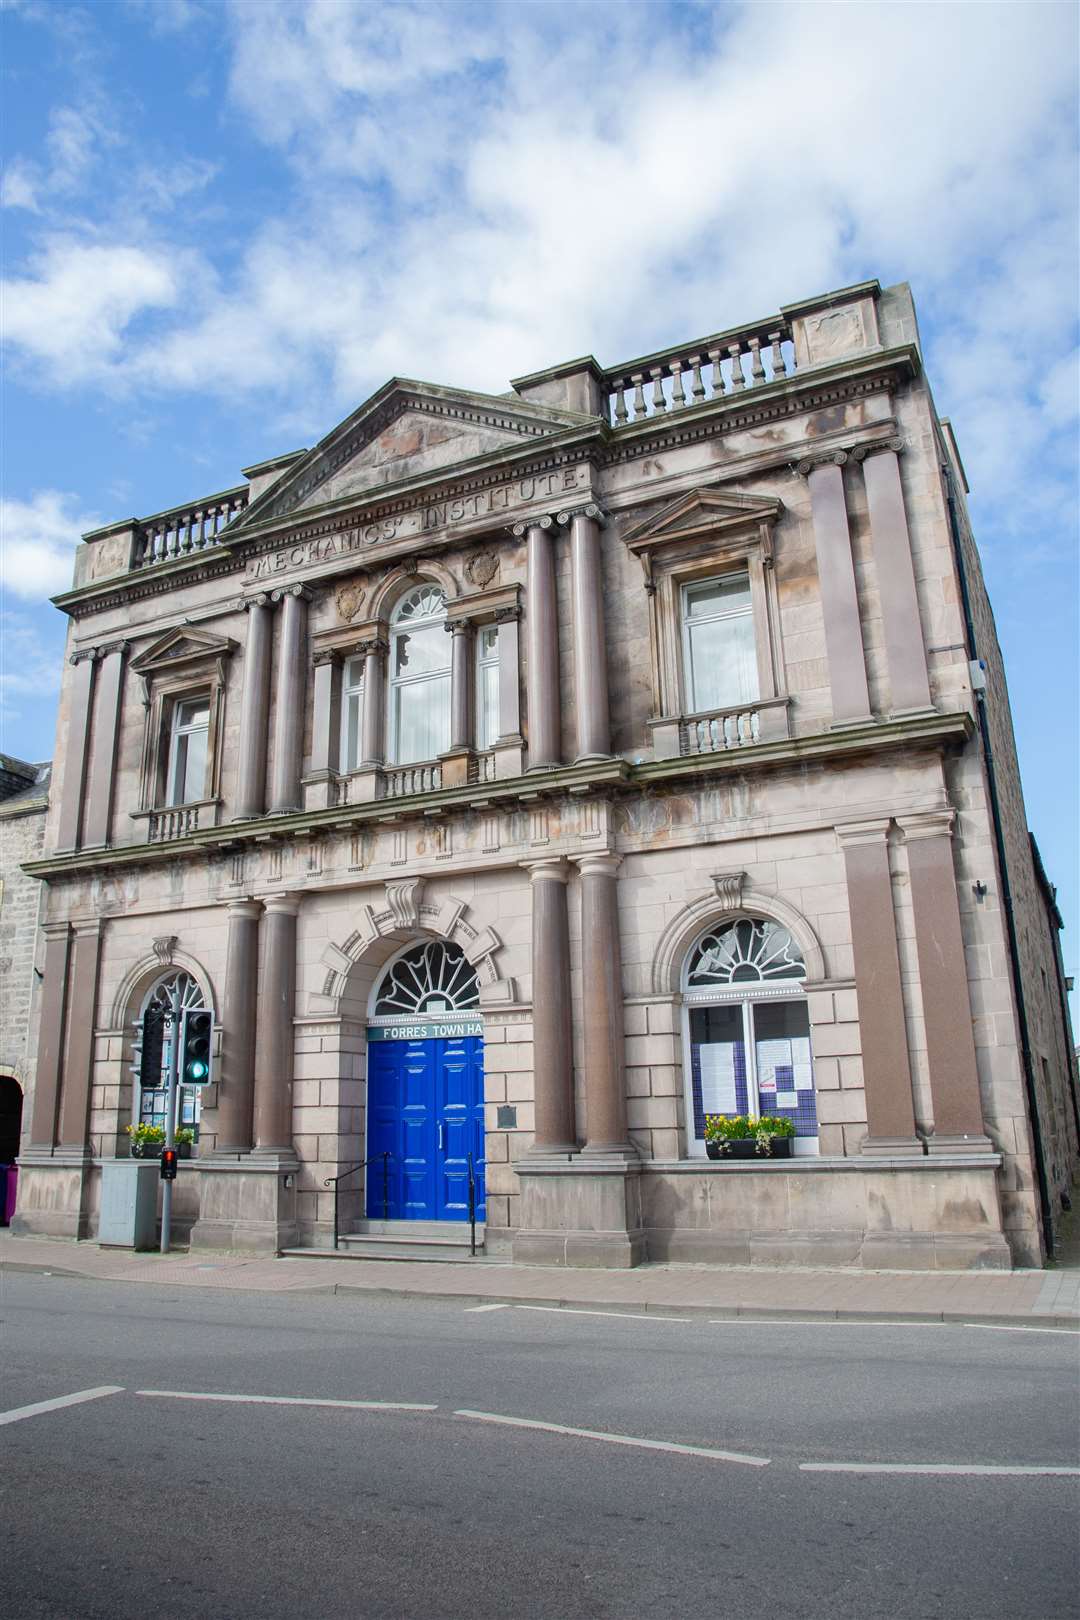 The renovated interior of Forres Town Hall will offer a community space fit for the 21st Century.